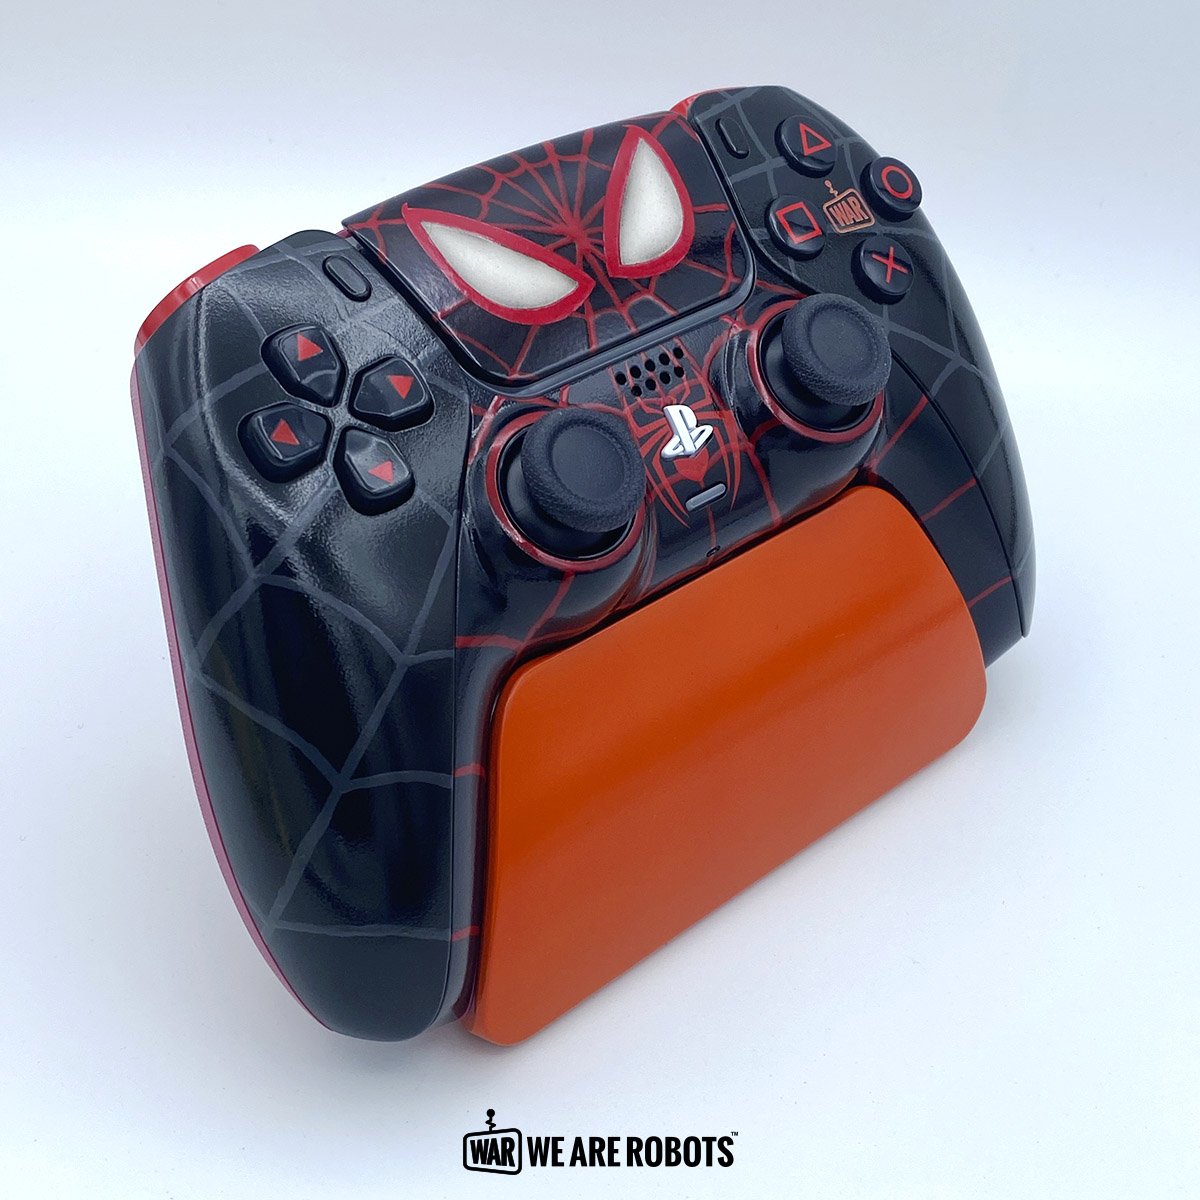 We Are Robots - Miles Morales - Spiderman - Playstation 5 Controller